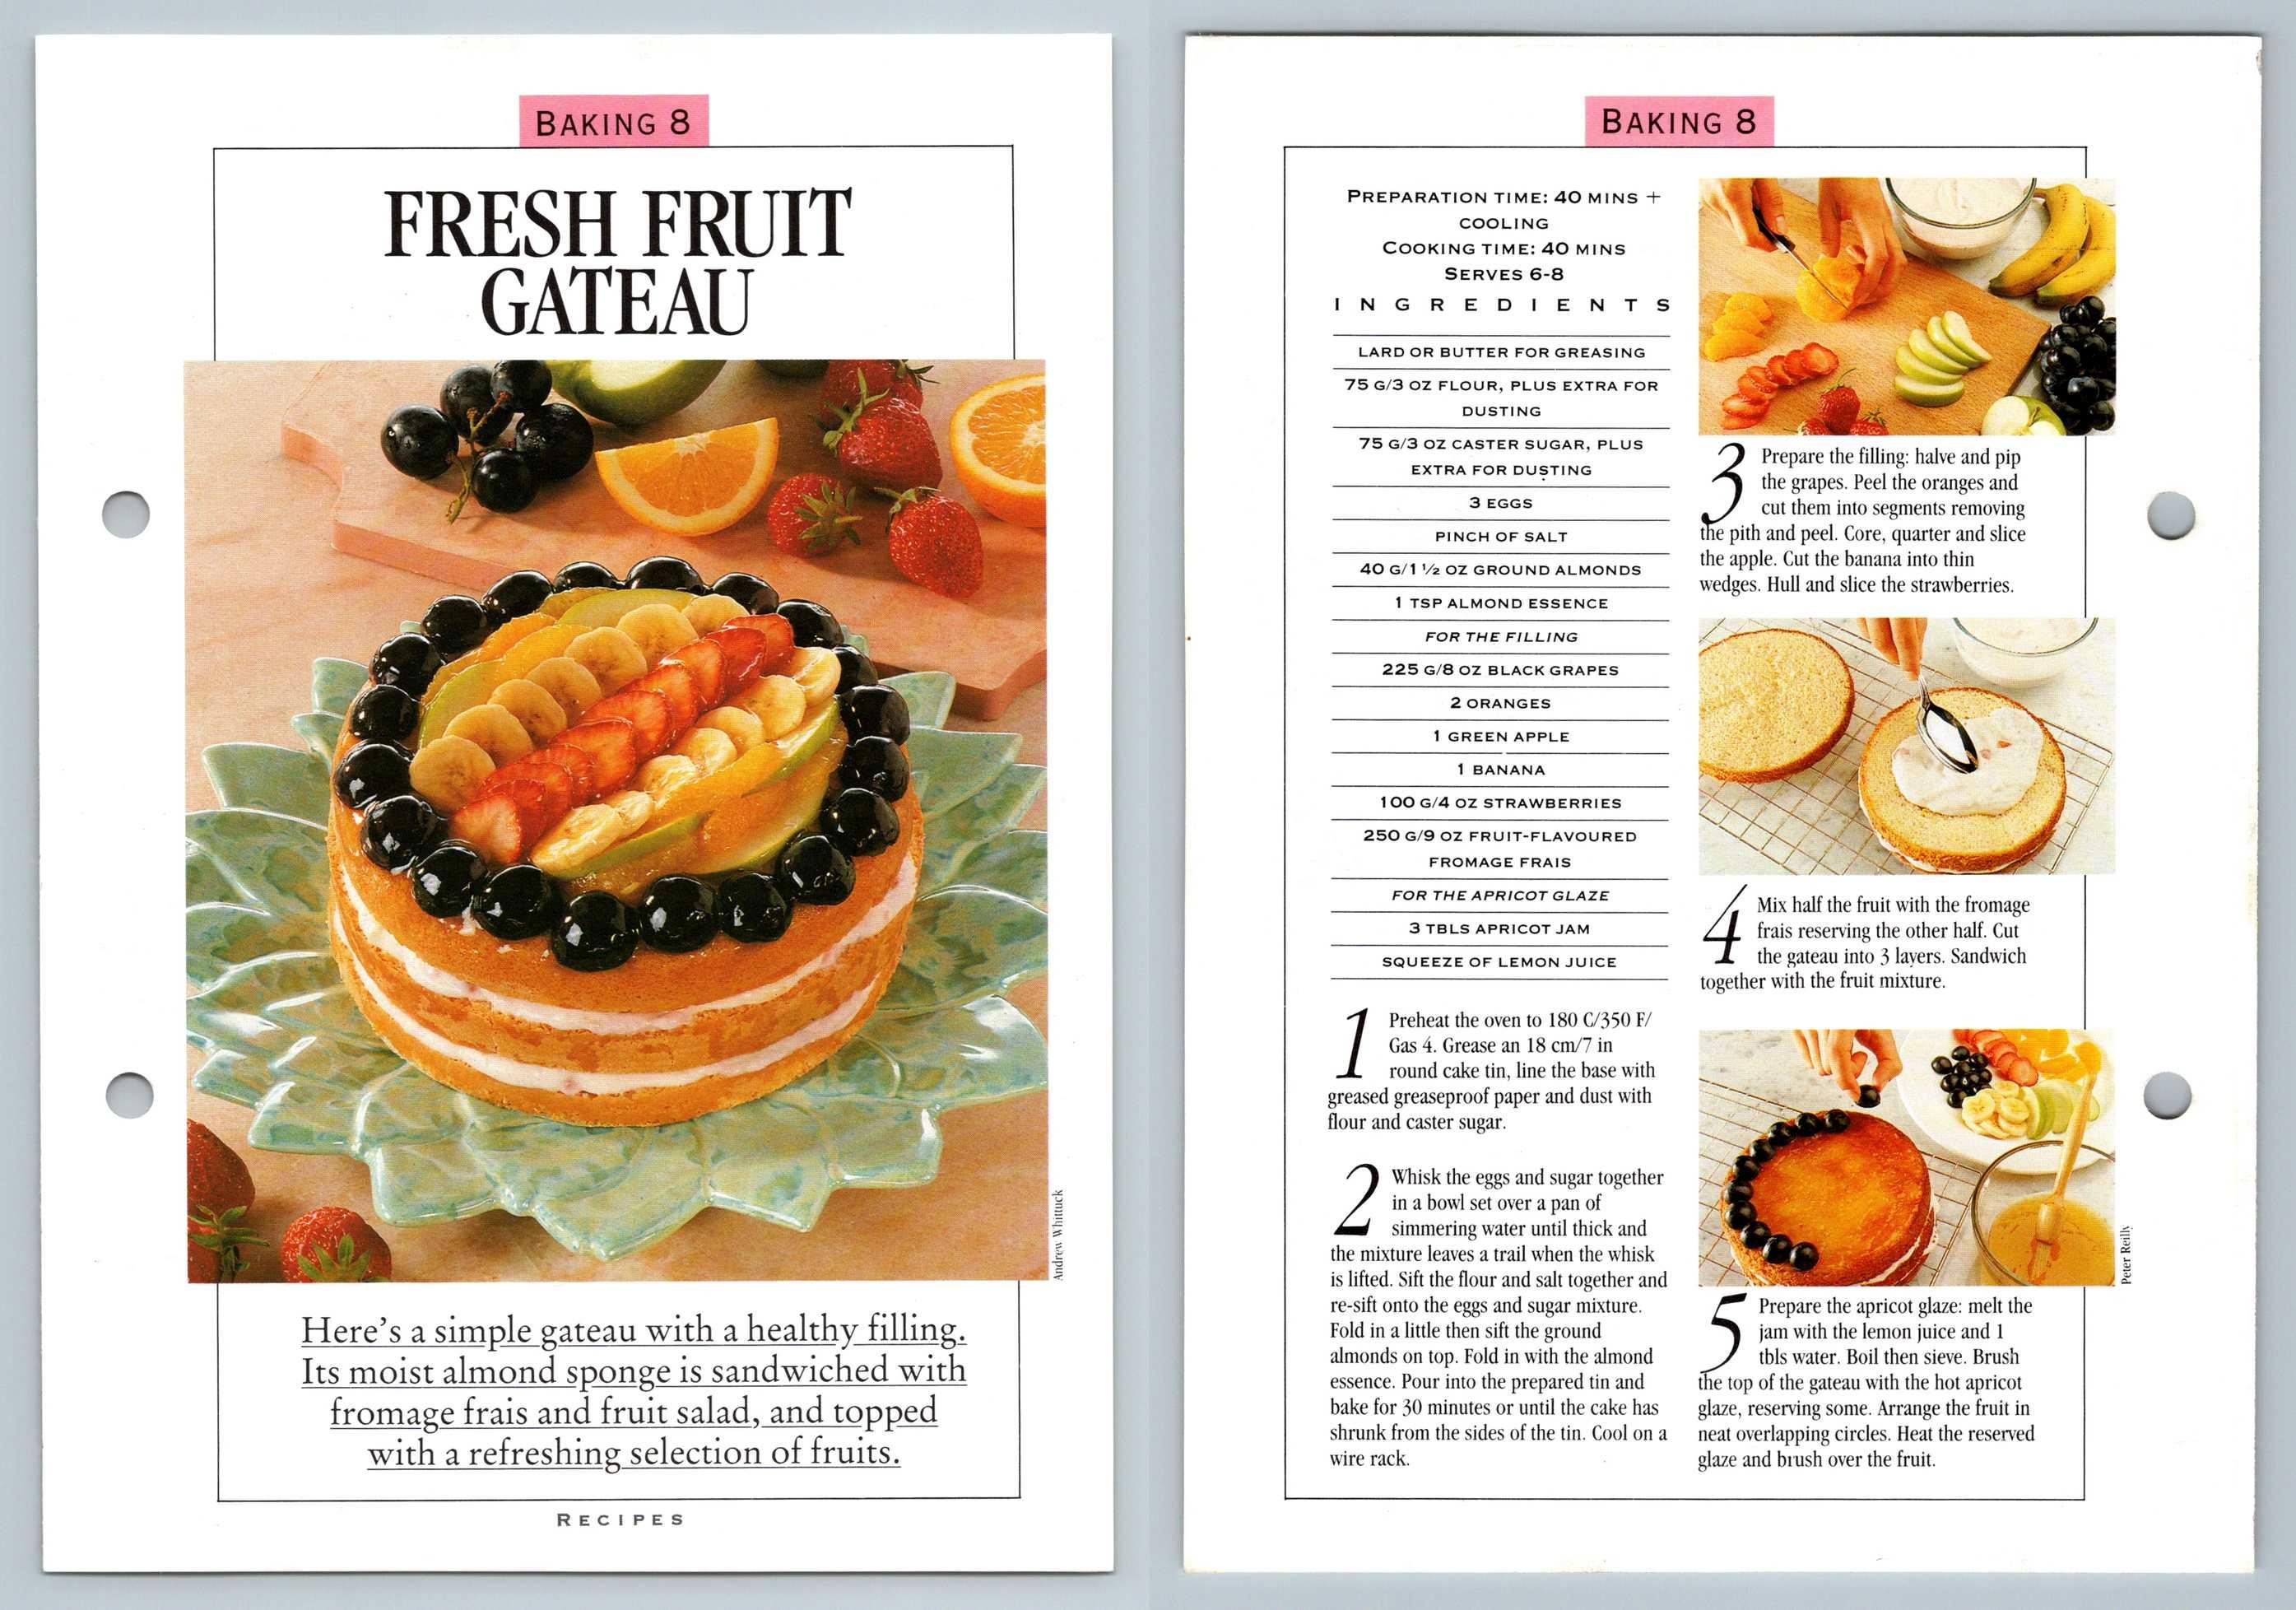 Fresh Fruit Gateau #8 Baking Prue Leith's Confident Cooking Recipe Page